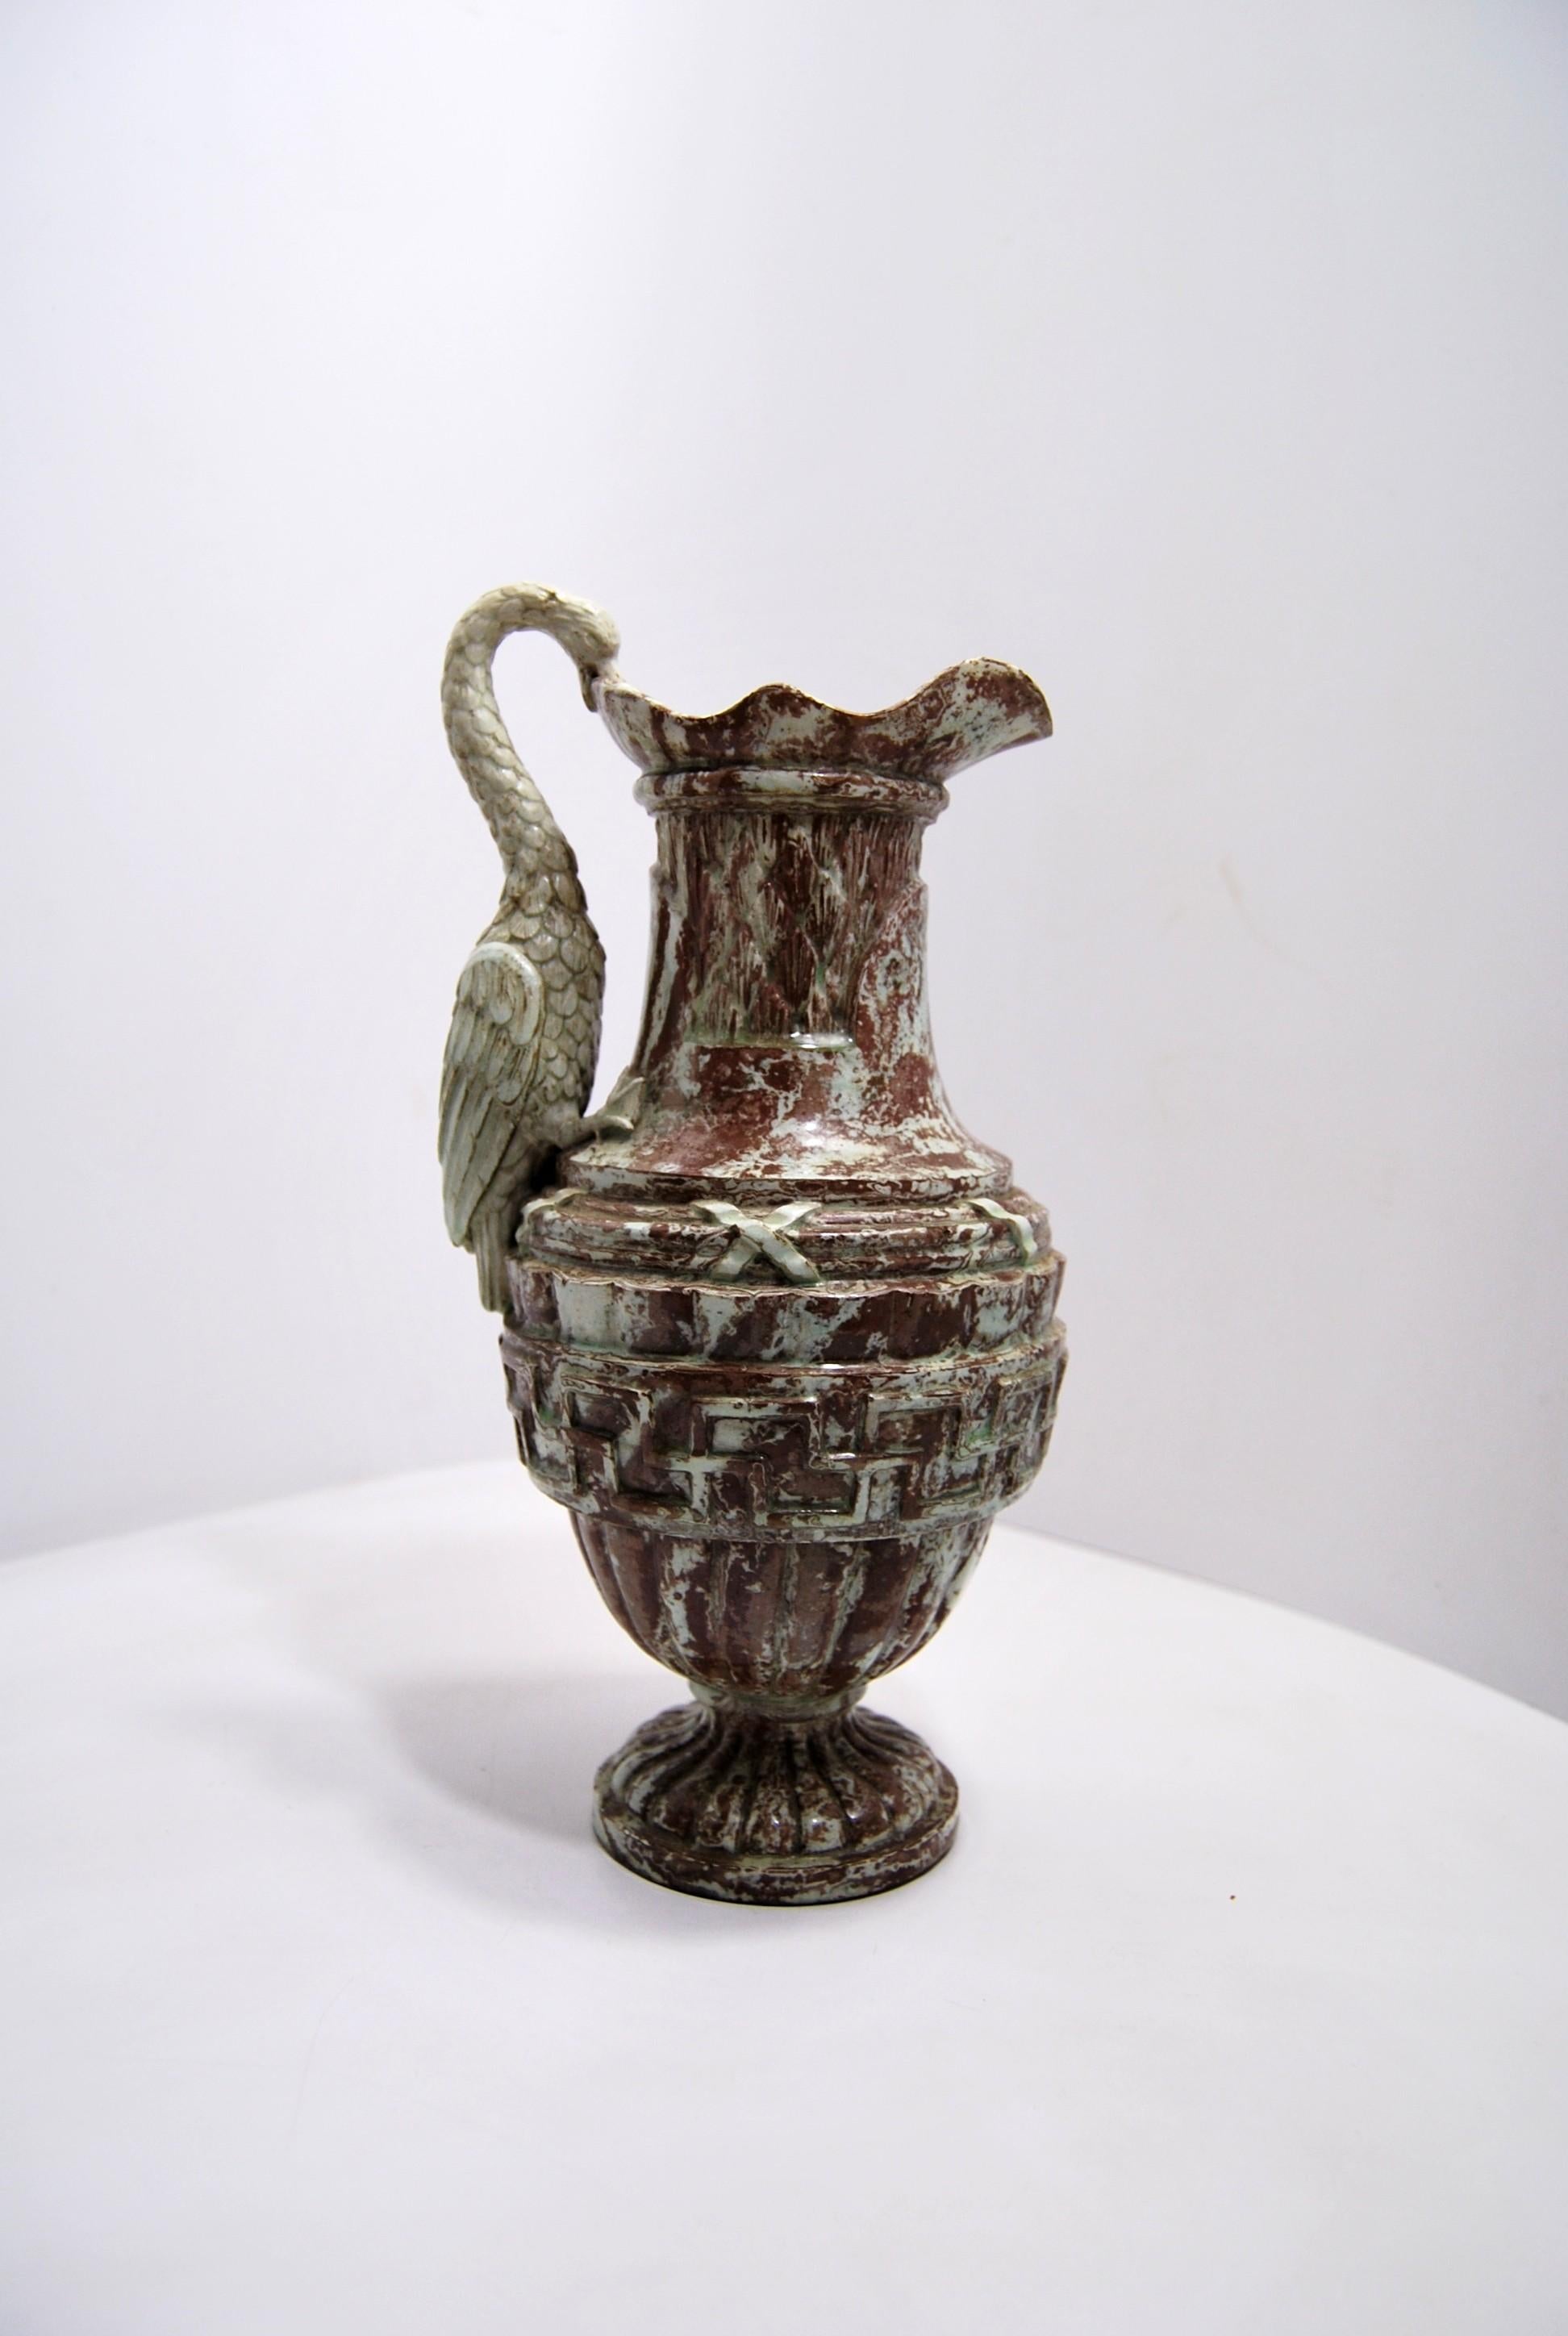 Rarely ewer in mixed clay from the Orleans factory of Grammont Ainé(1764-1832)
End of the 18th century, around 1790
Very beautiful & rare zoomorphic ewer in earthenware mixed with the appearance of marble covered with translucent enamel with green